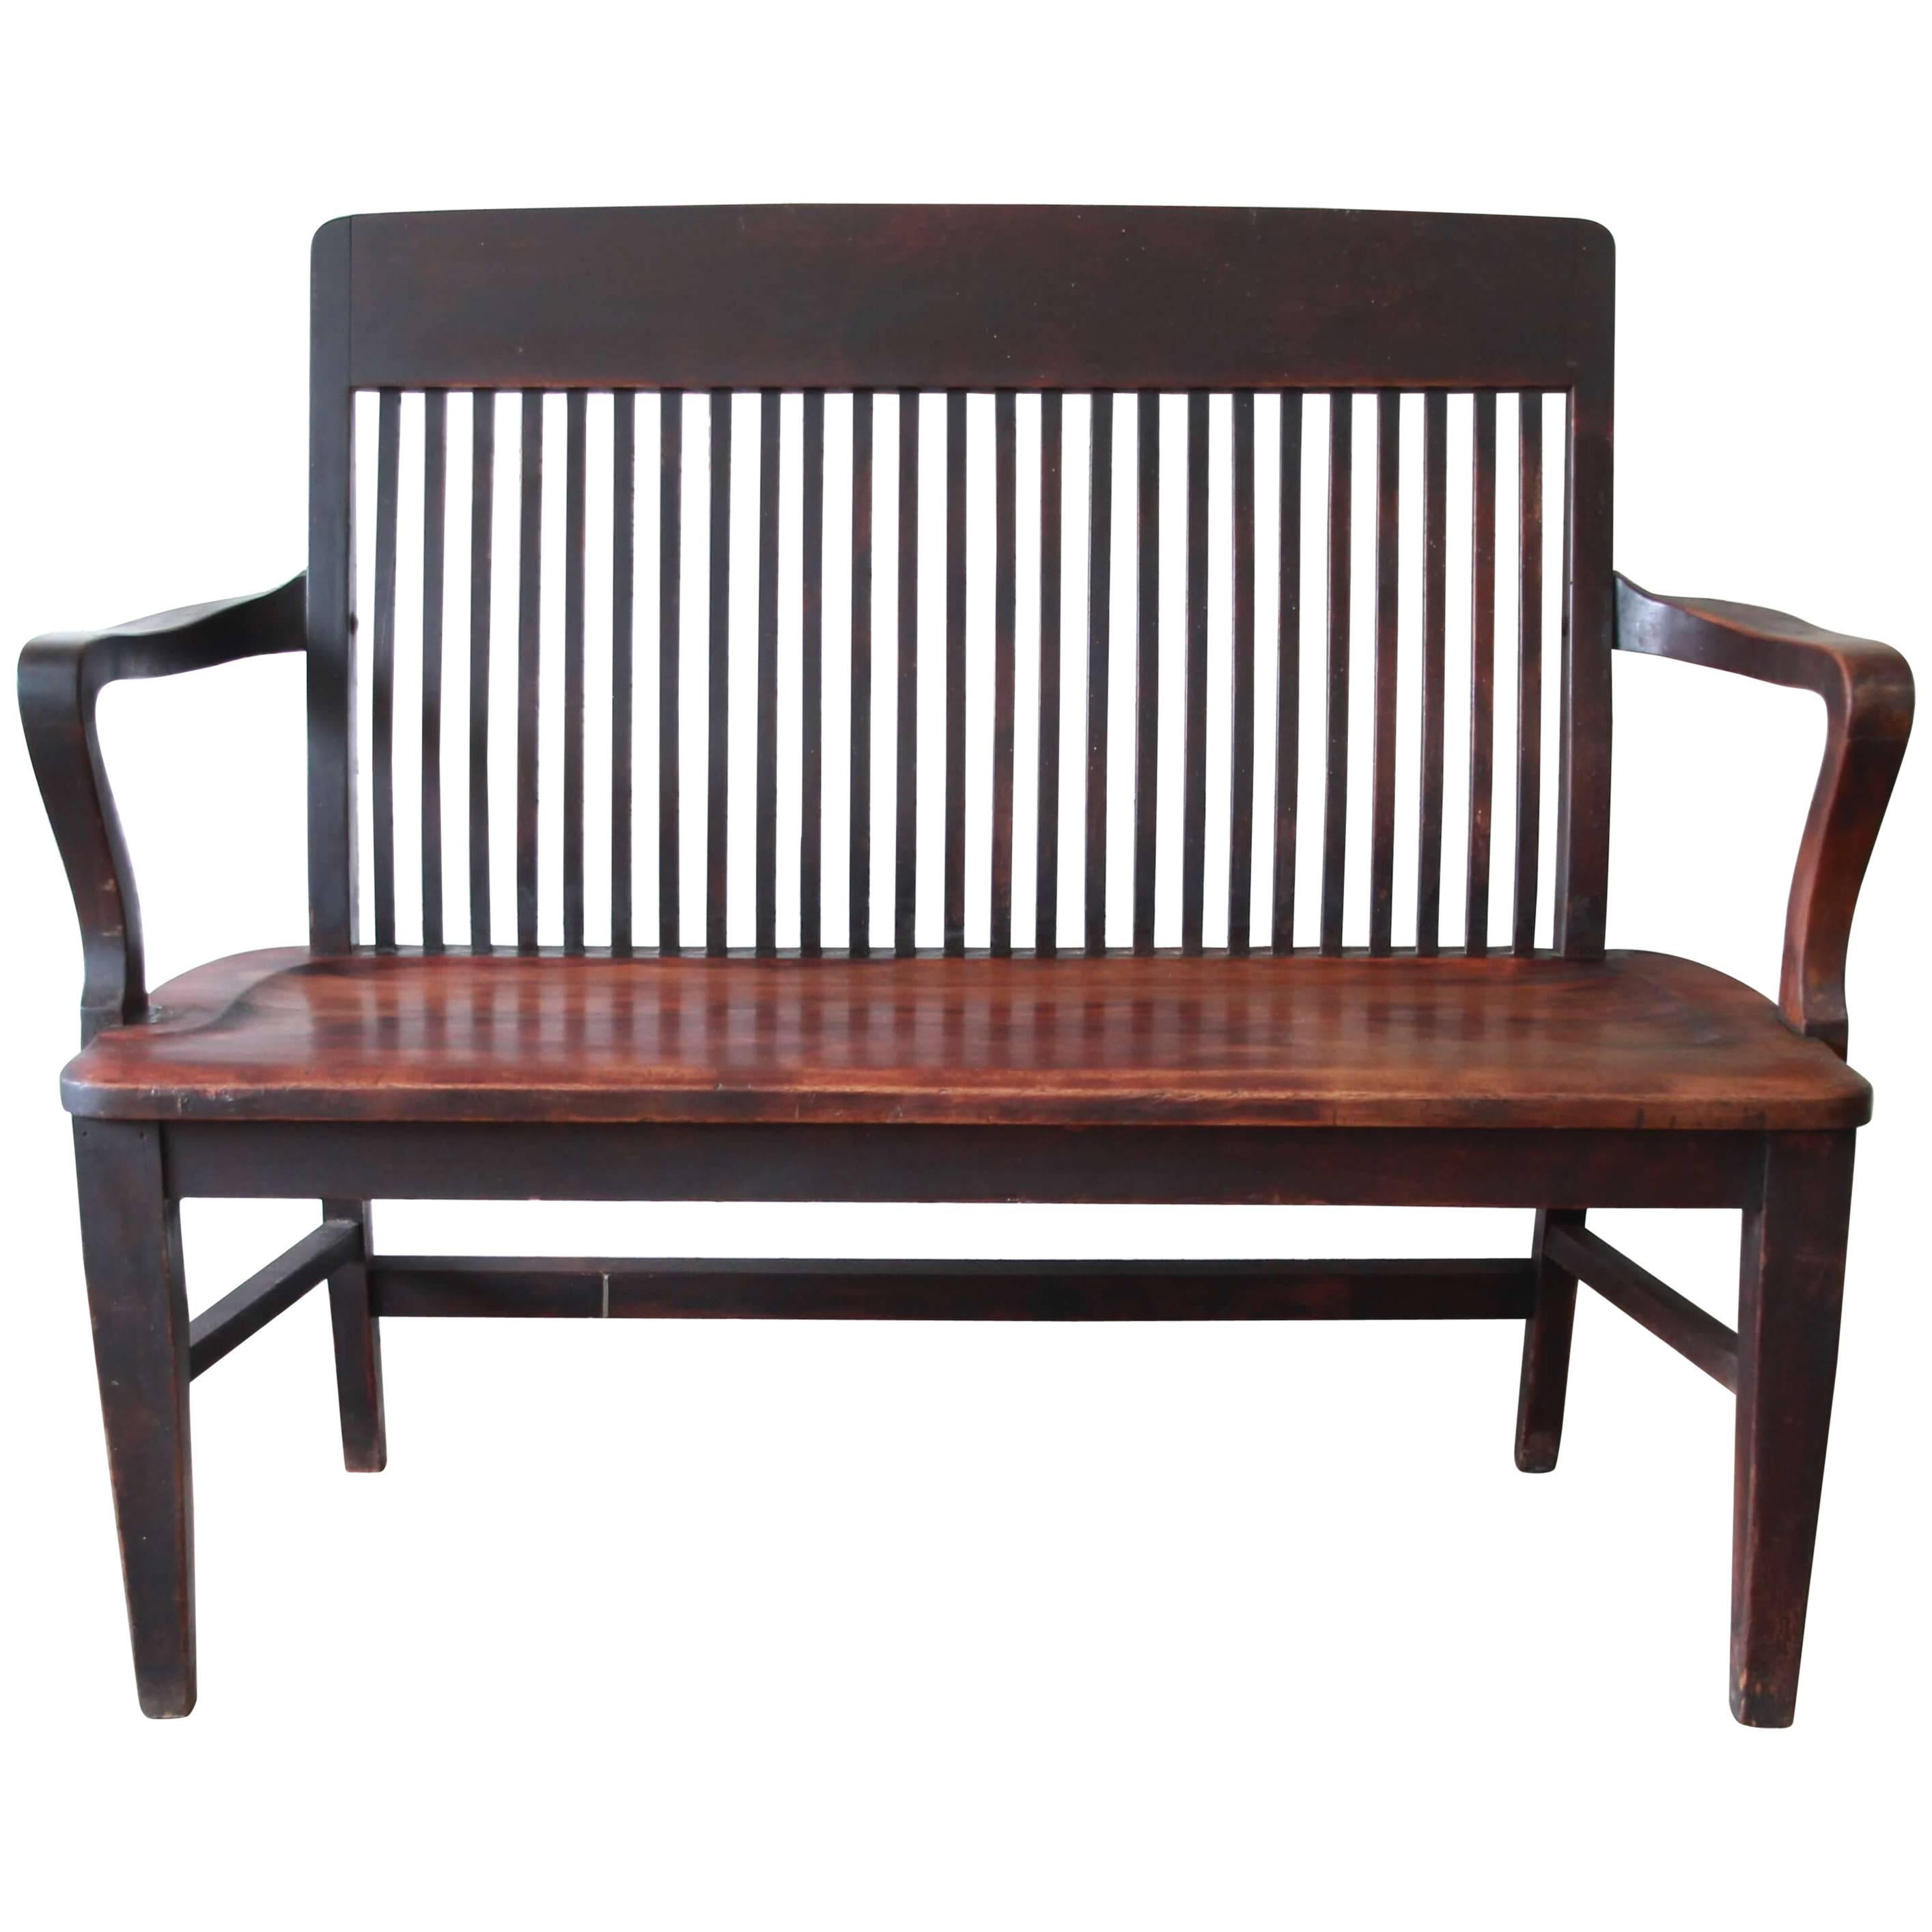 Antique Mahogany Banker's Bench by Milwaukee Chair Company, circa 1900